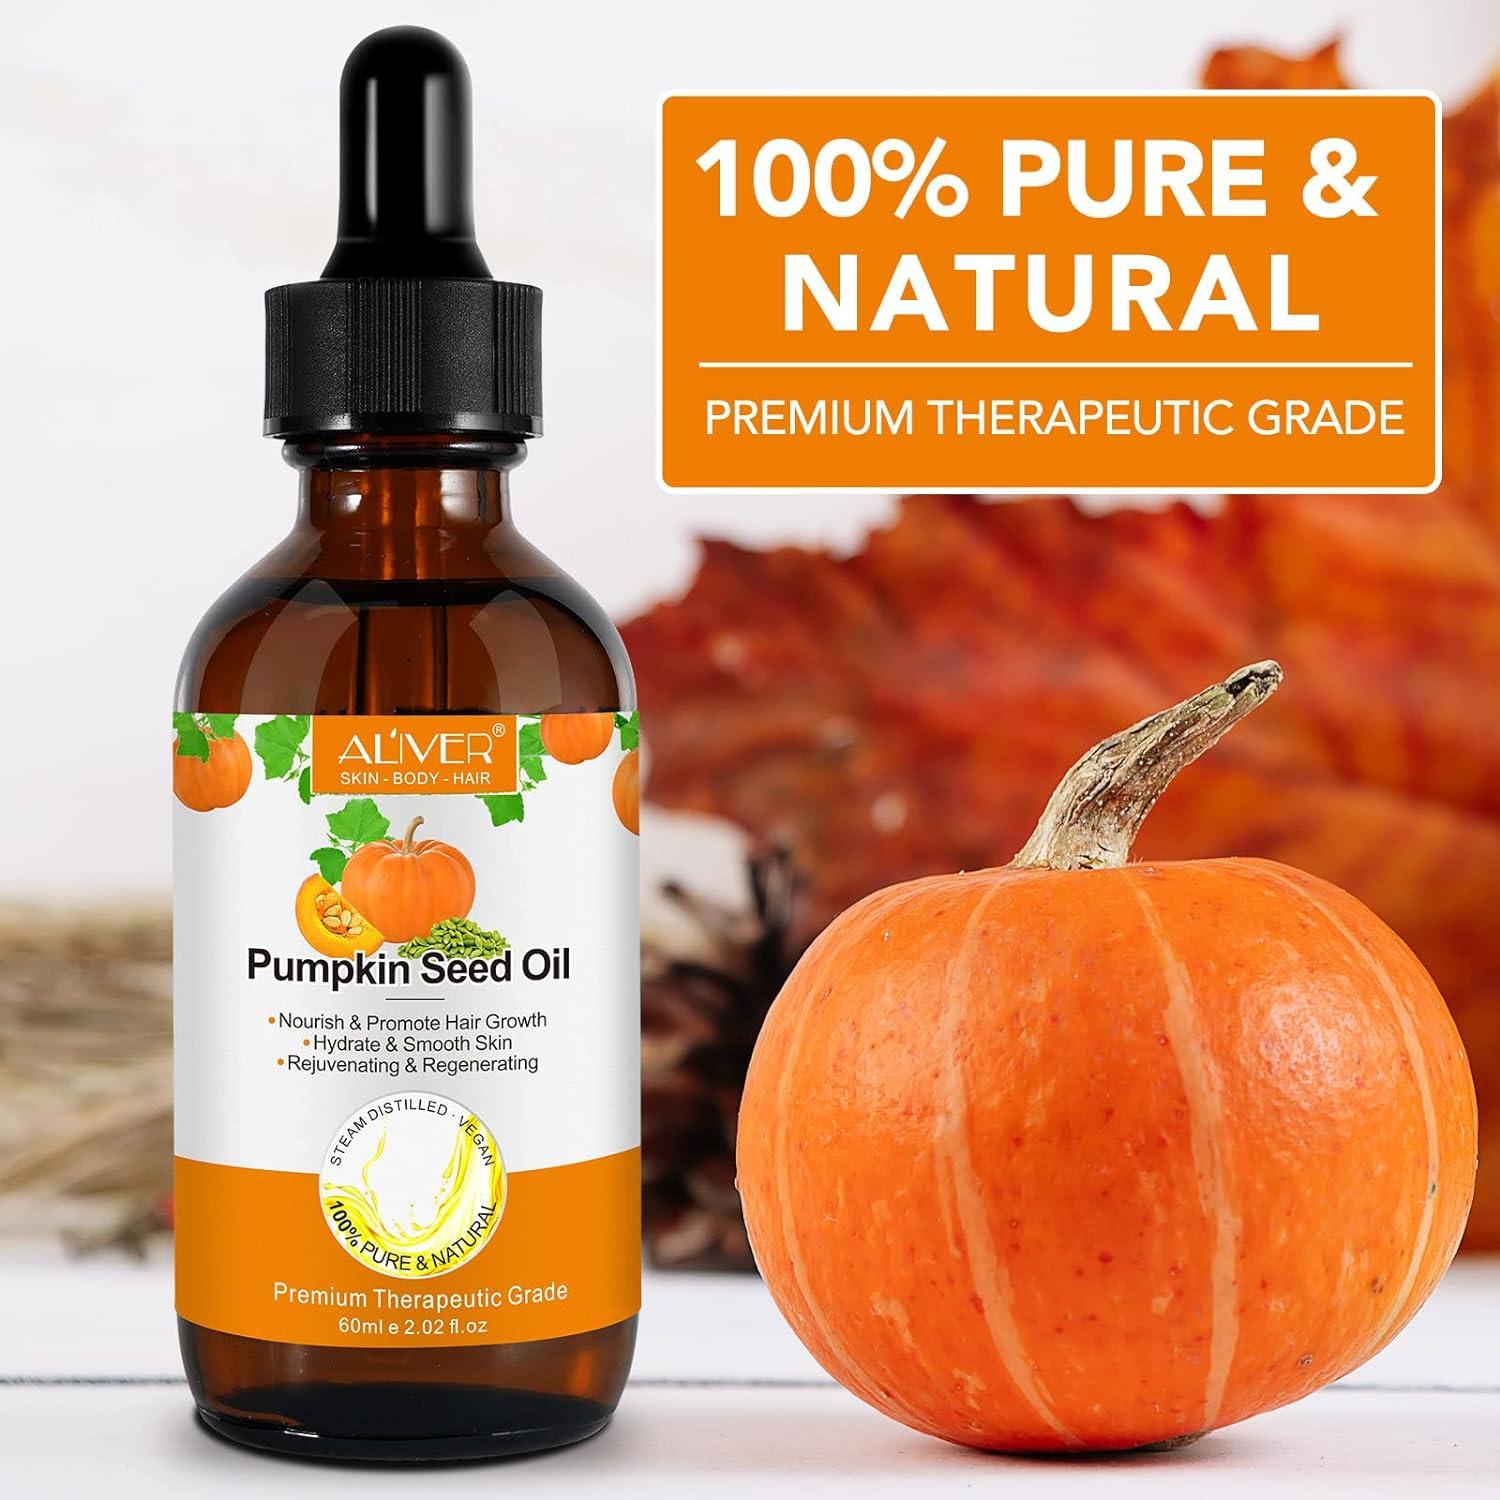 Pumpkin Seed Oil For Hair Growth: Is It Effective?